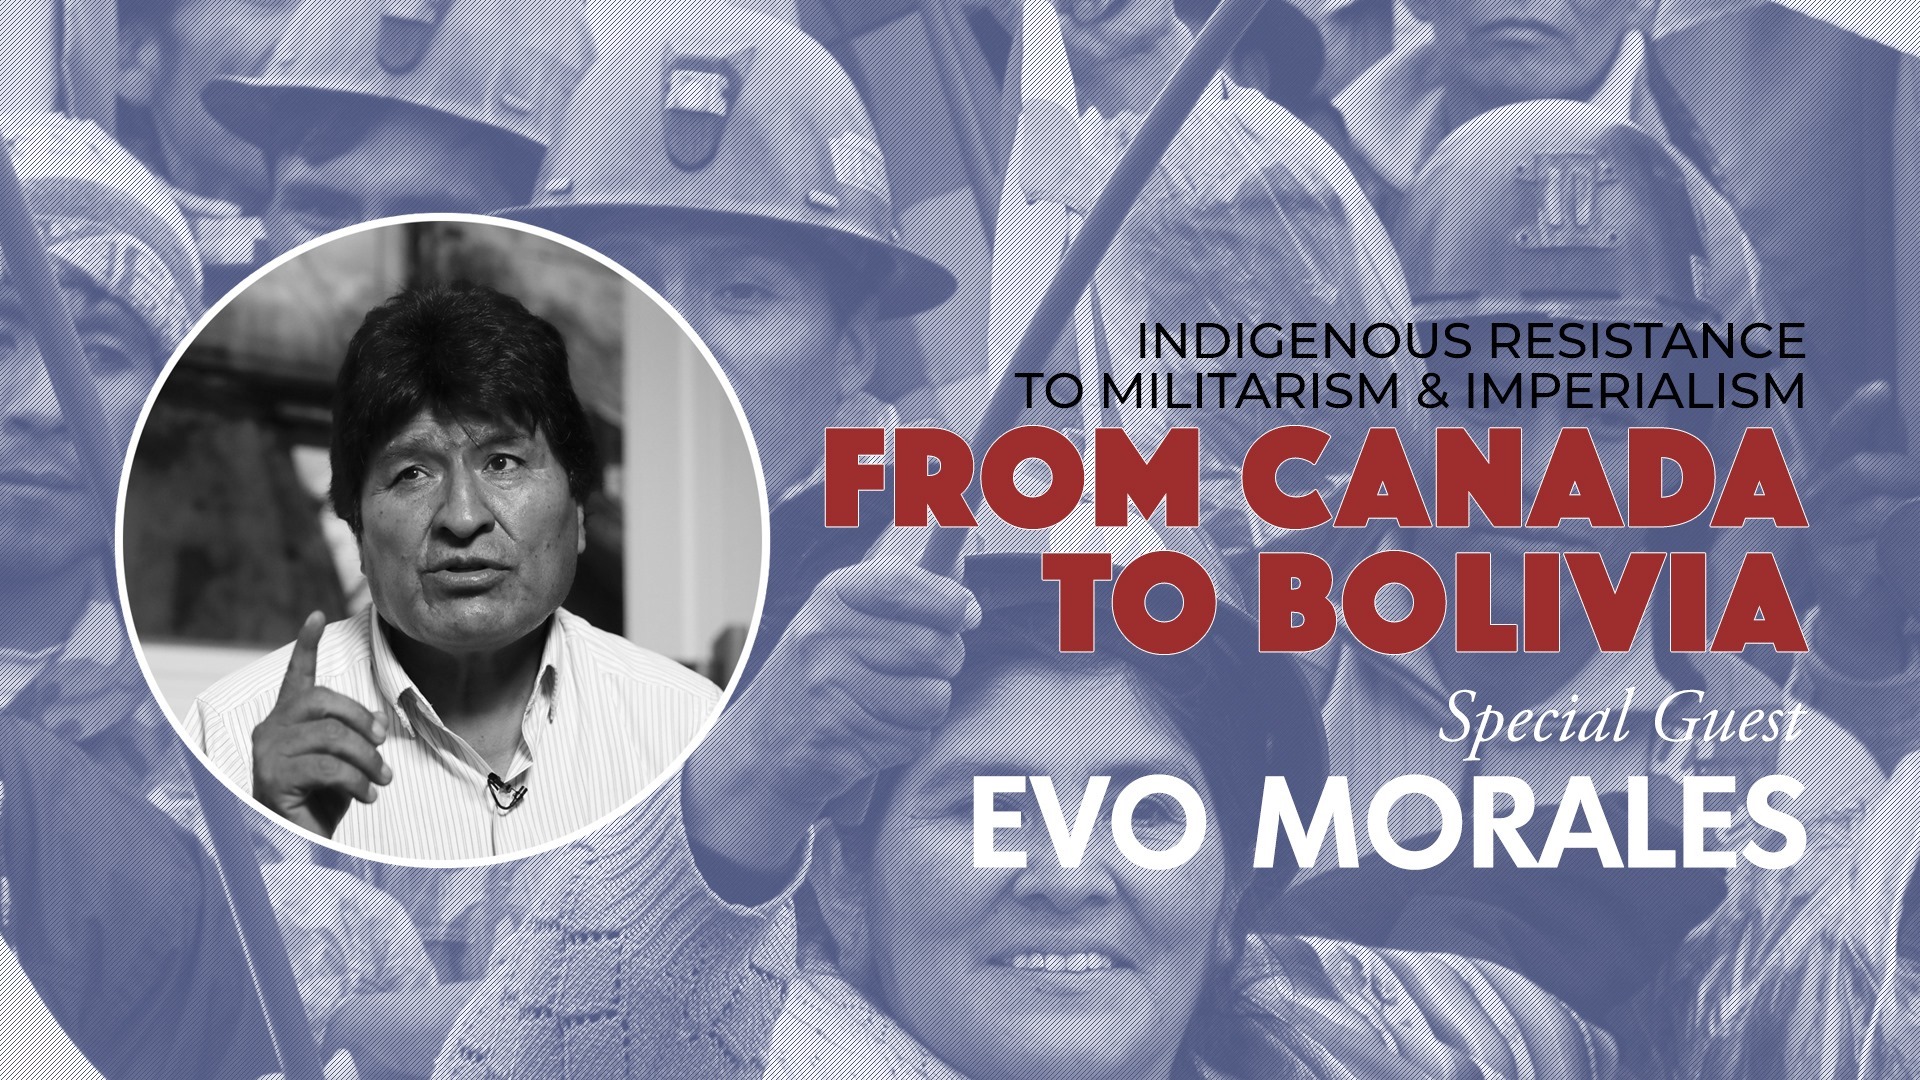 From Canada to Bolivia with Evo Morales